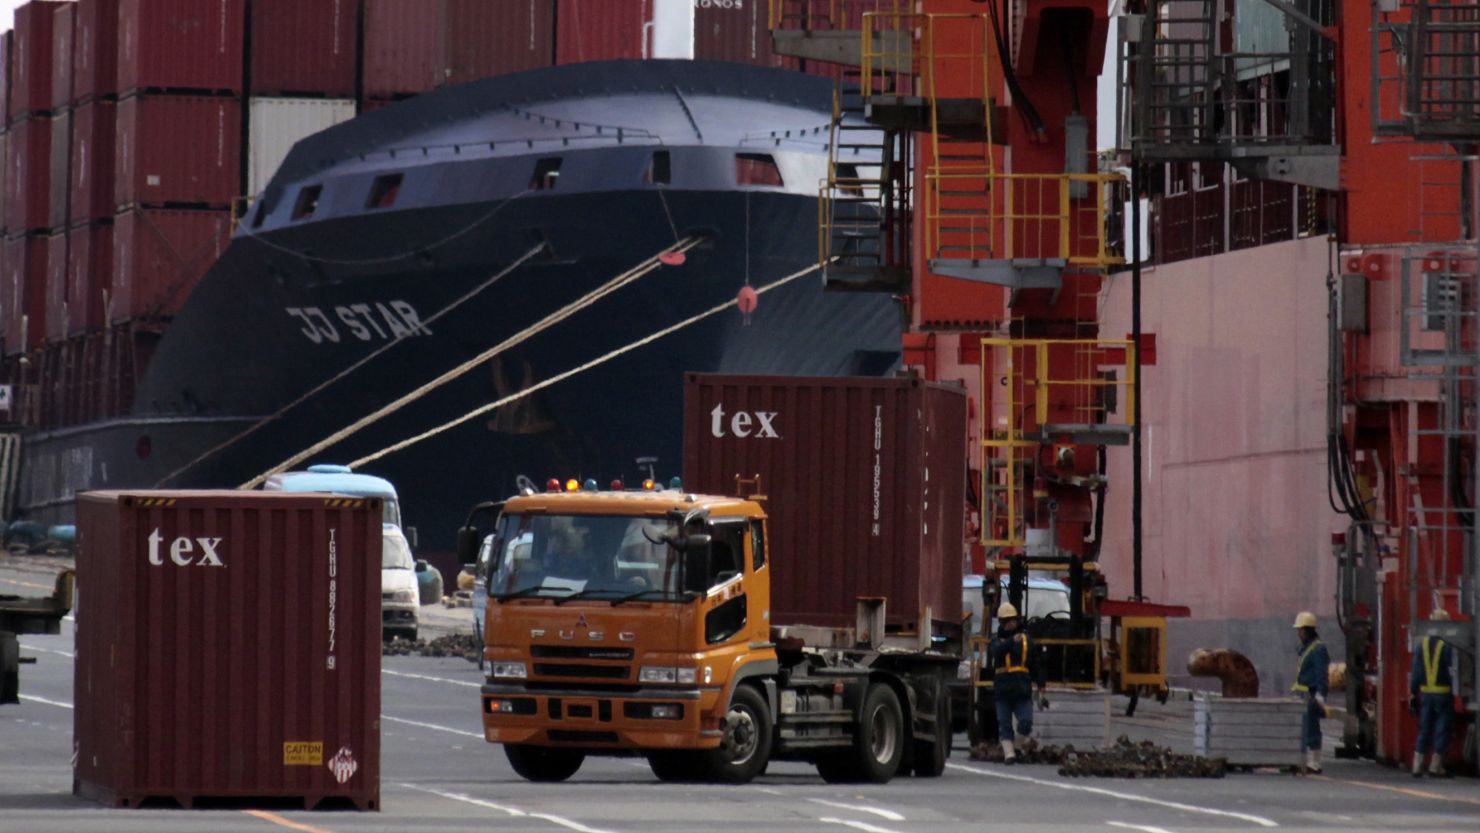 Containers are loaded and unloaded from a container vessel at a Tokyo port in this 2011 file photo.